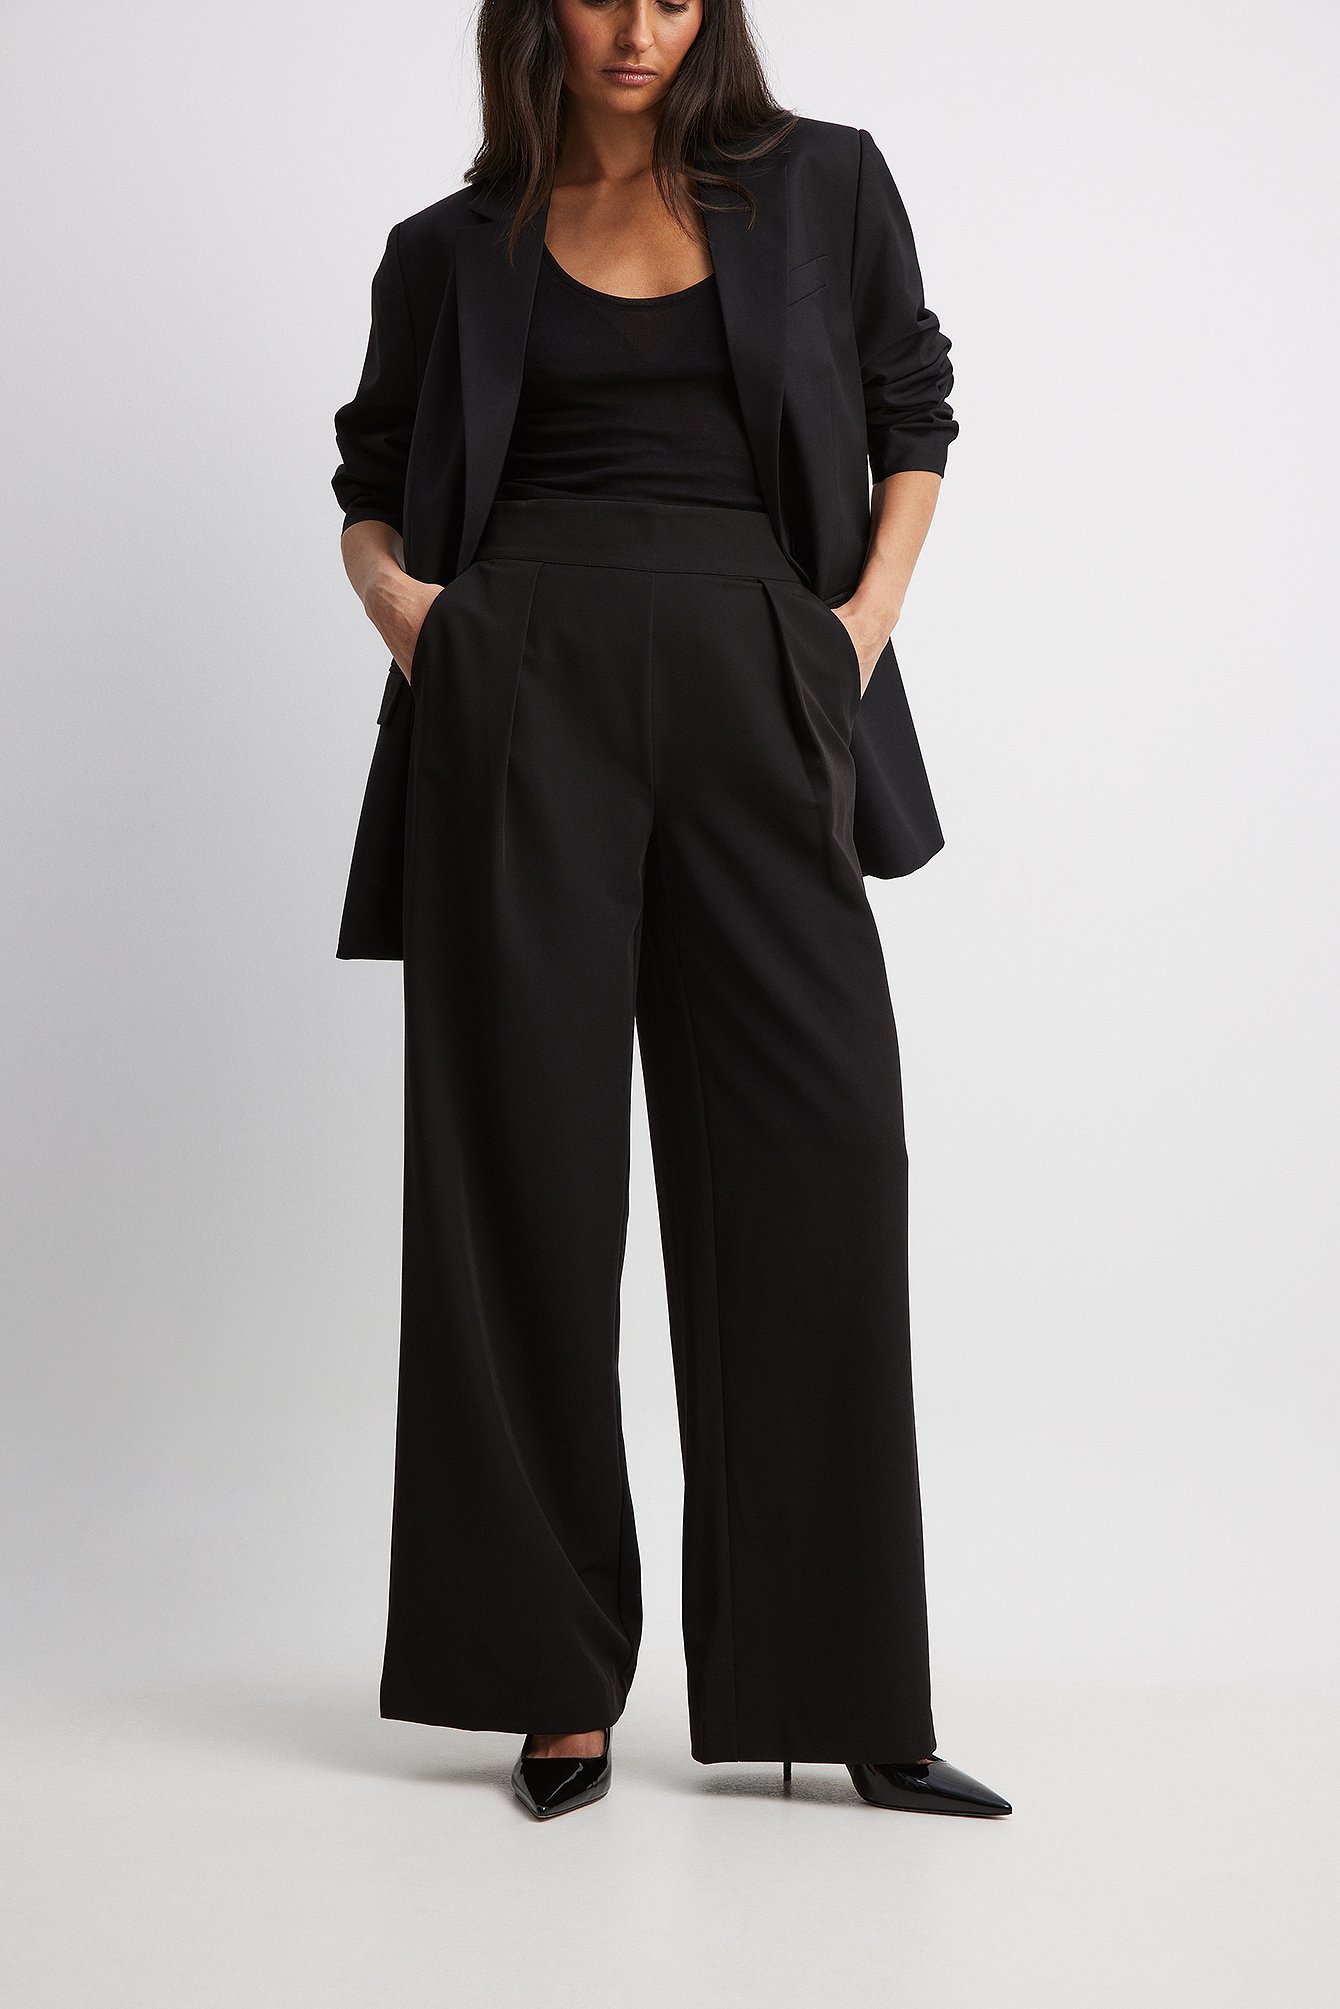 Black Check Slim Fit Suit Trousers | New Look